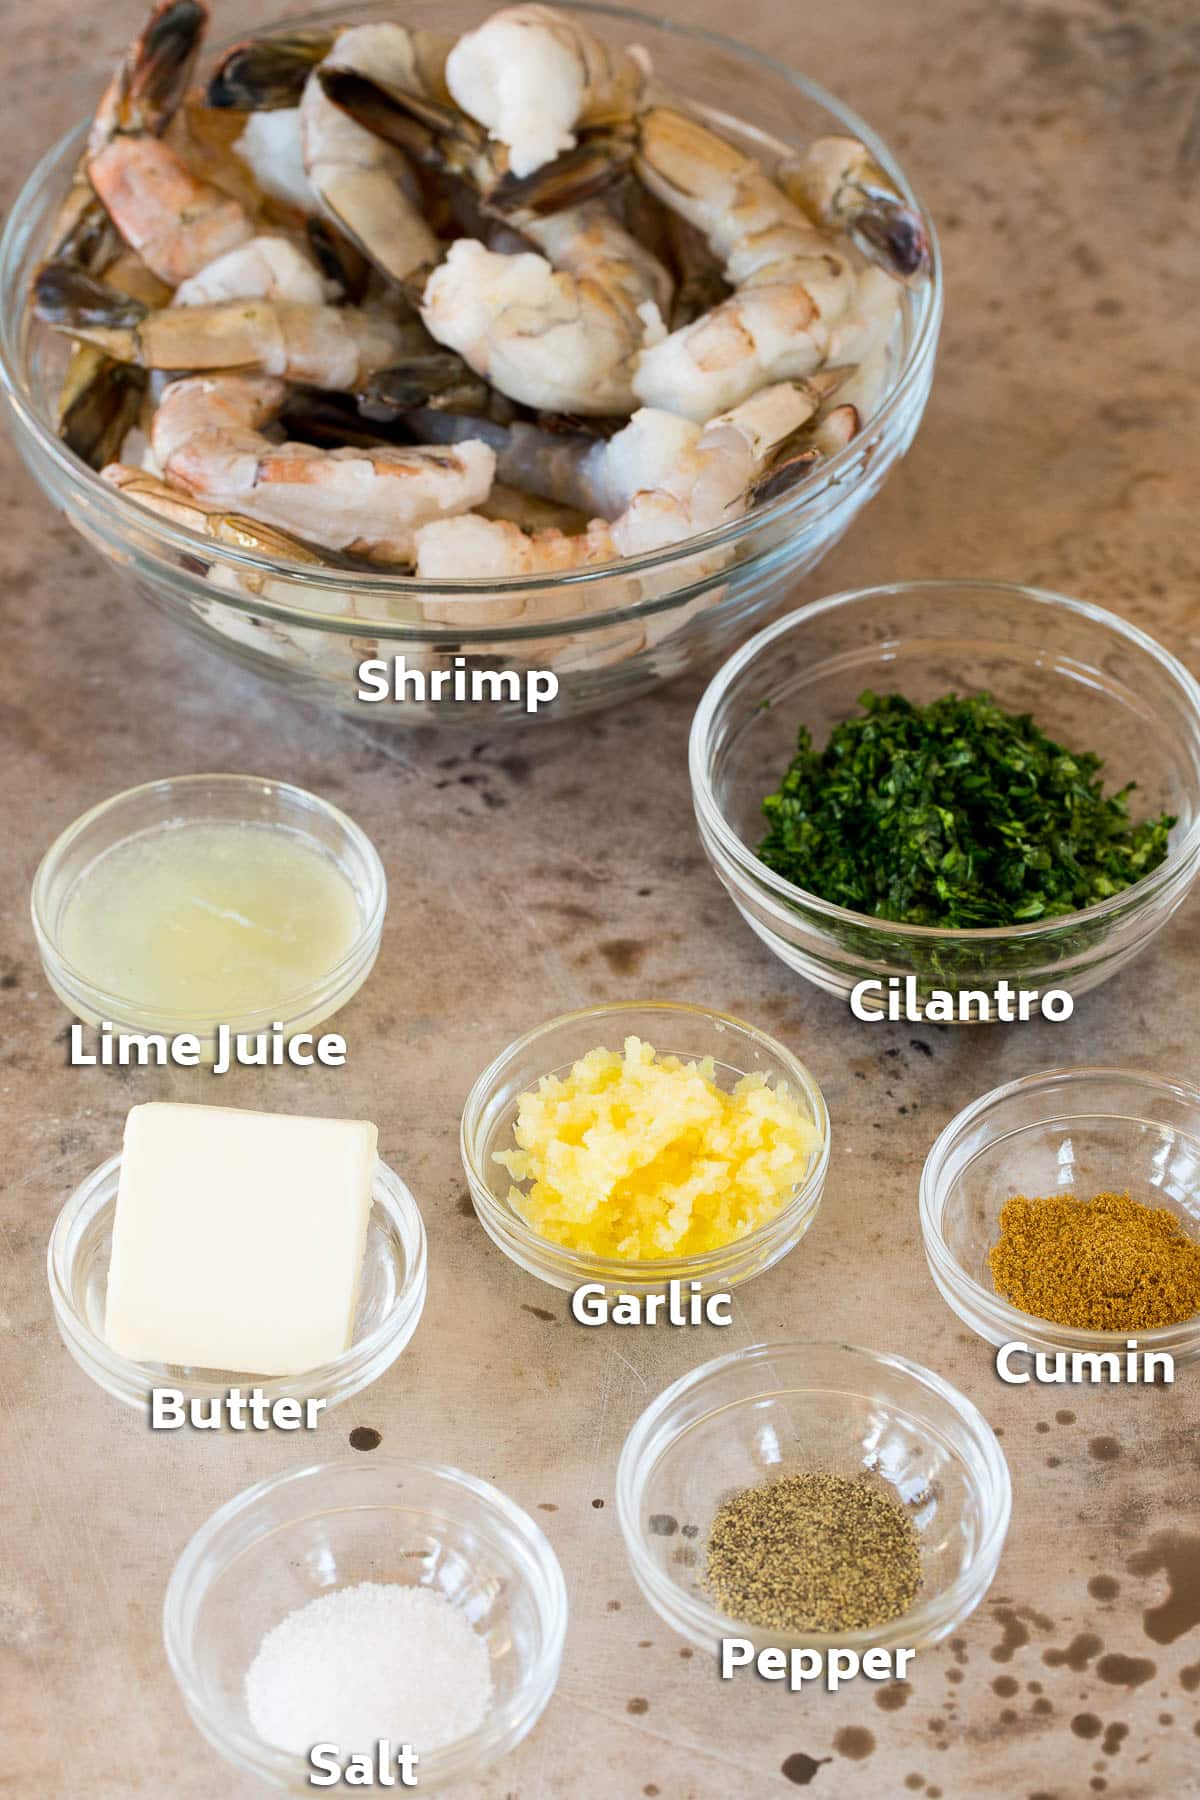 Bowls of ingredients including butter, garlic, shrimp and cumin.